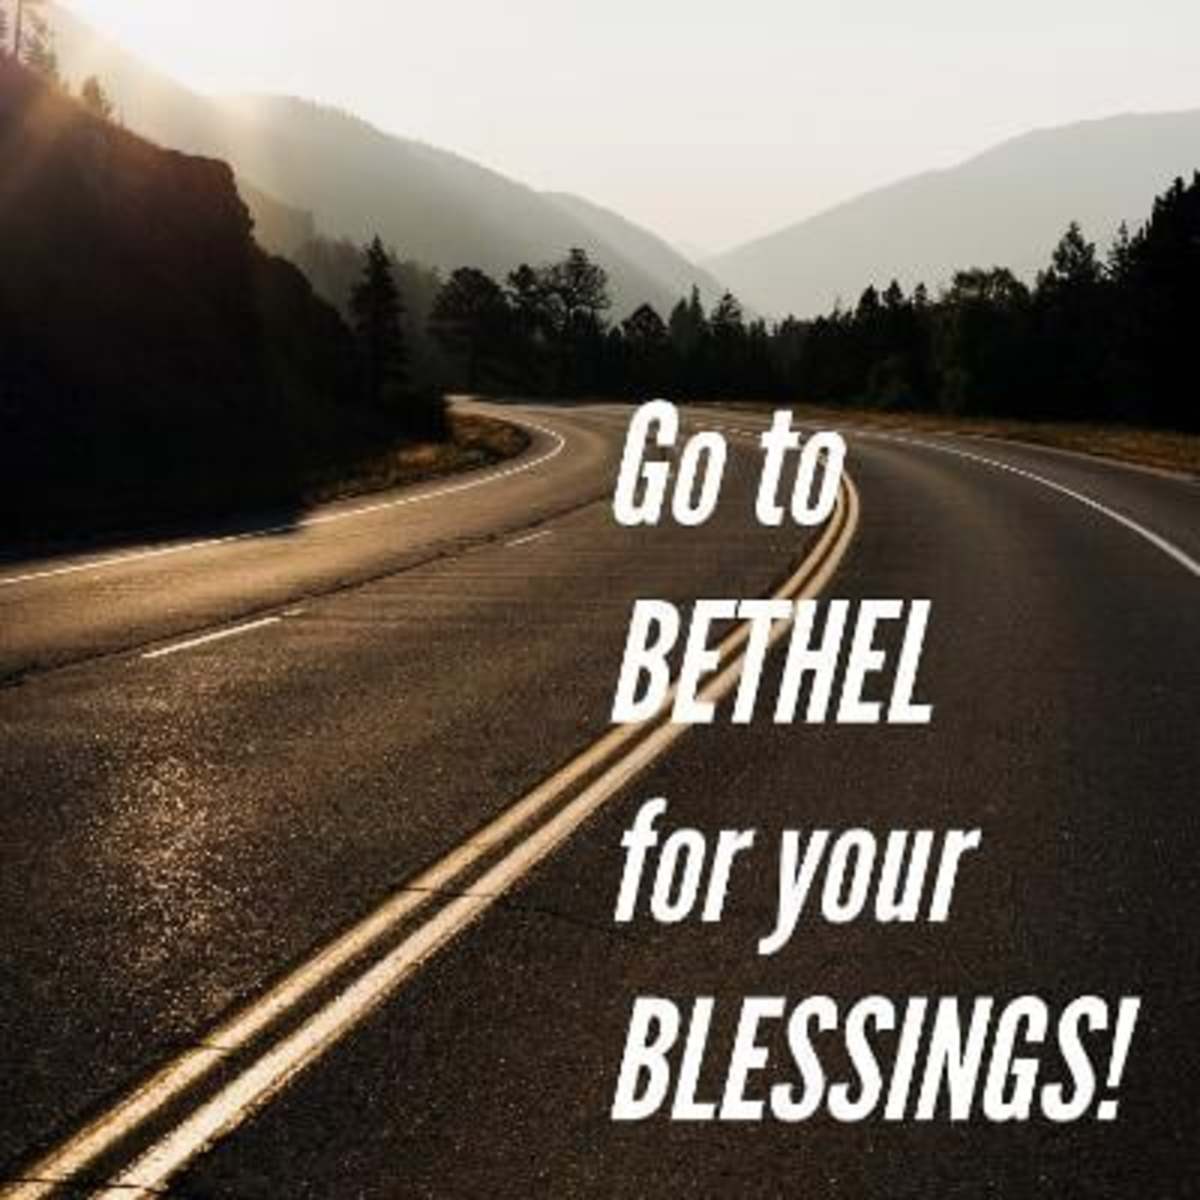 bethel-place-of-blessings